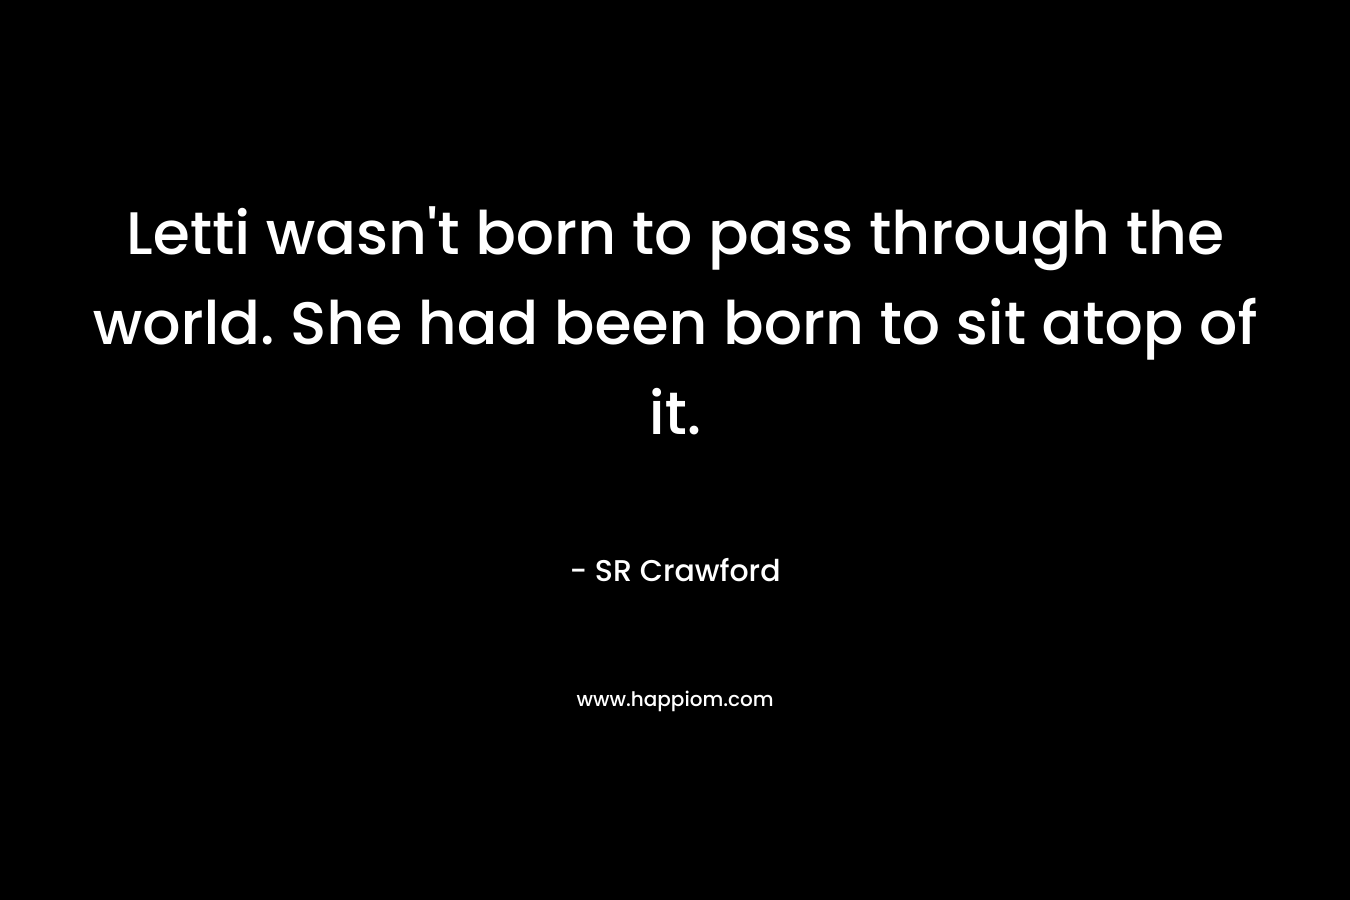 Letti wasn’t born to pass through the world. She had been born to sit atop of it. – SR Crawford